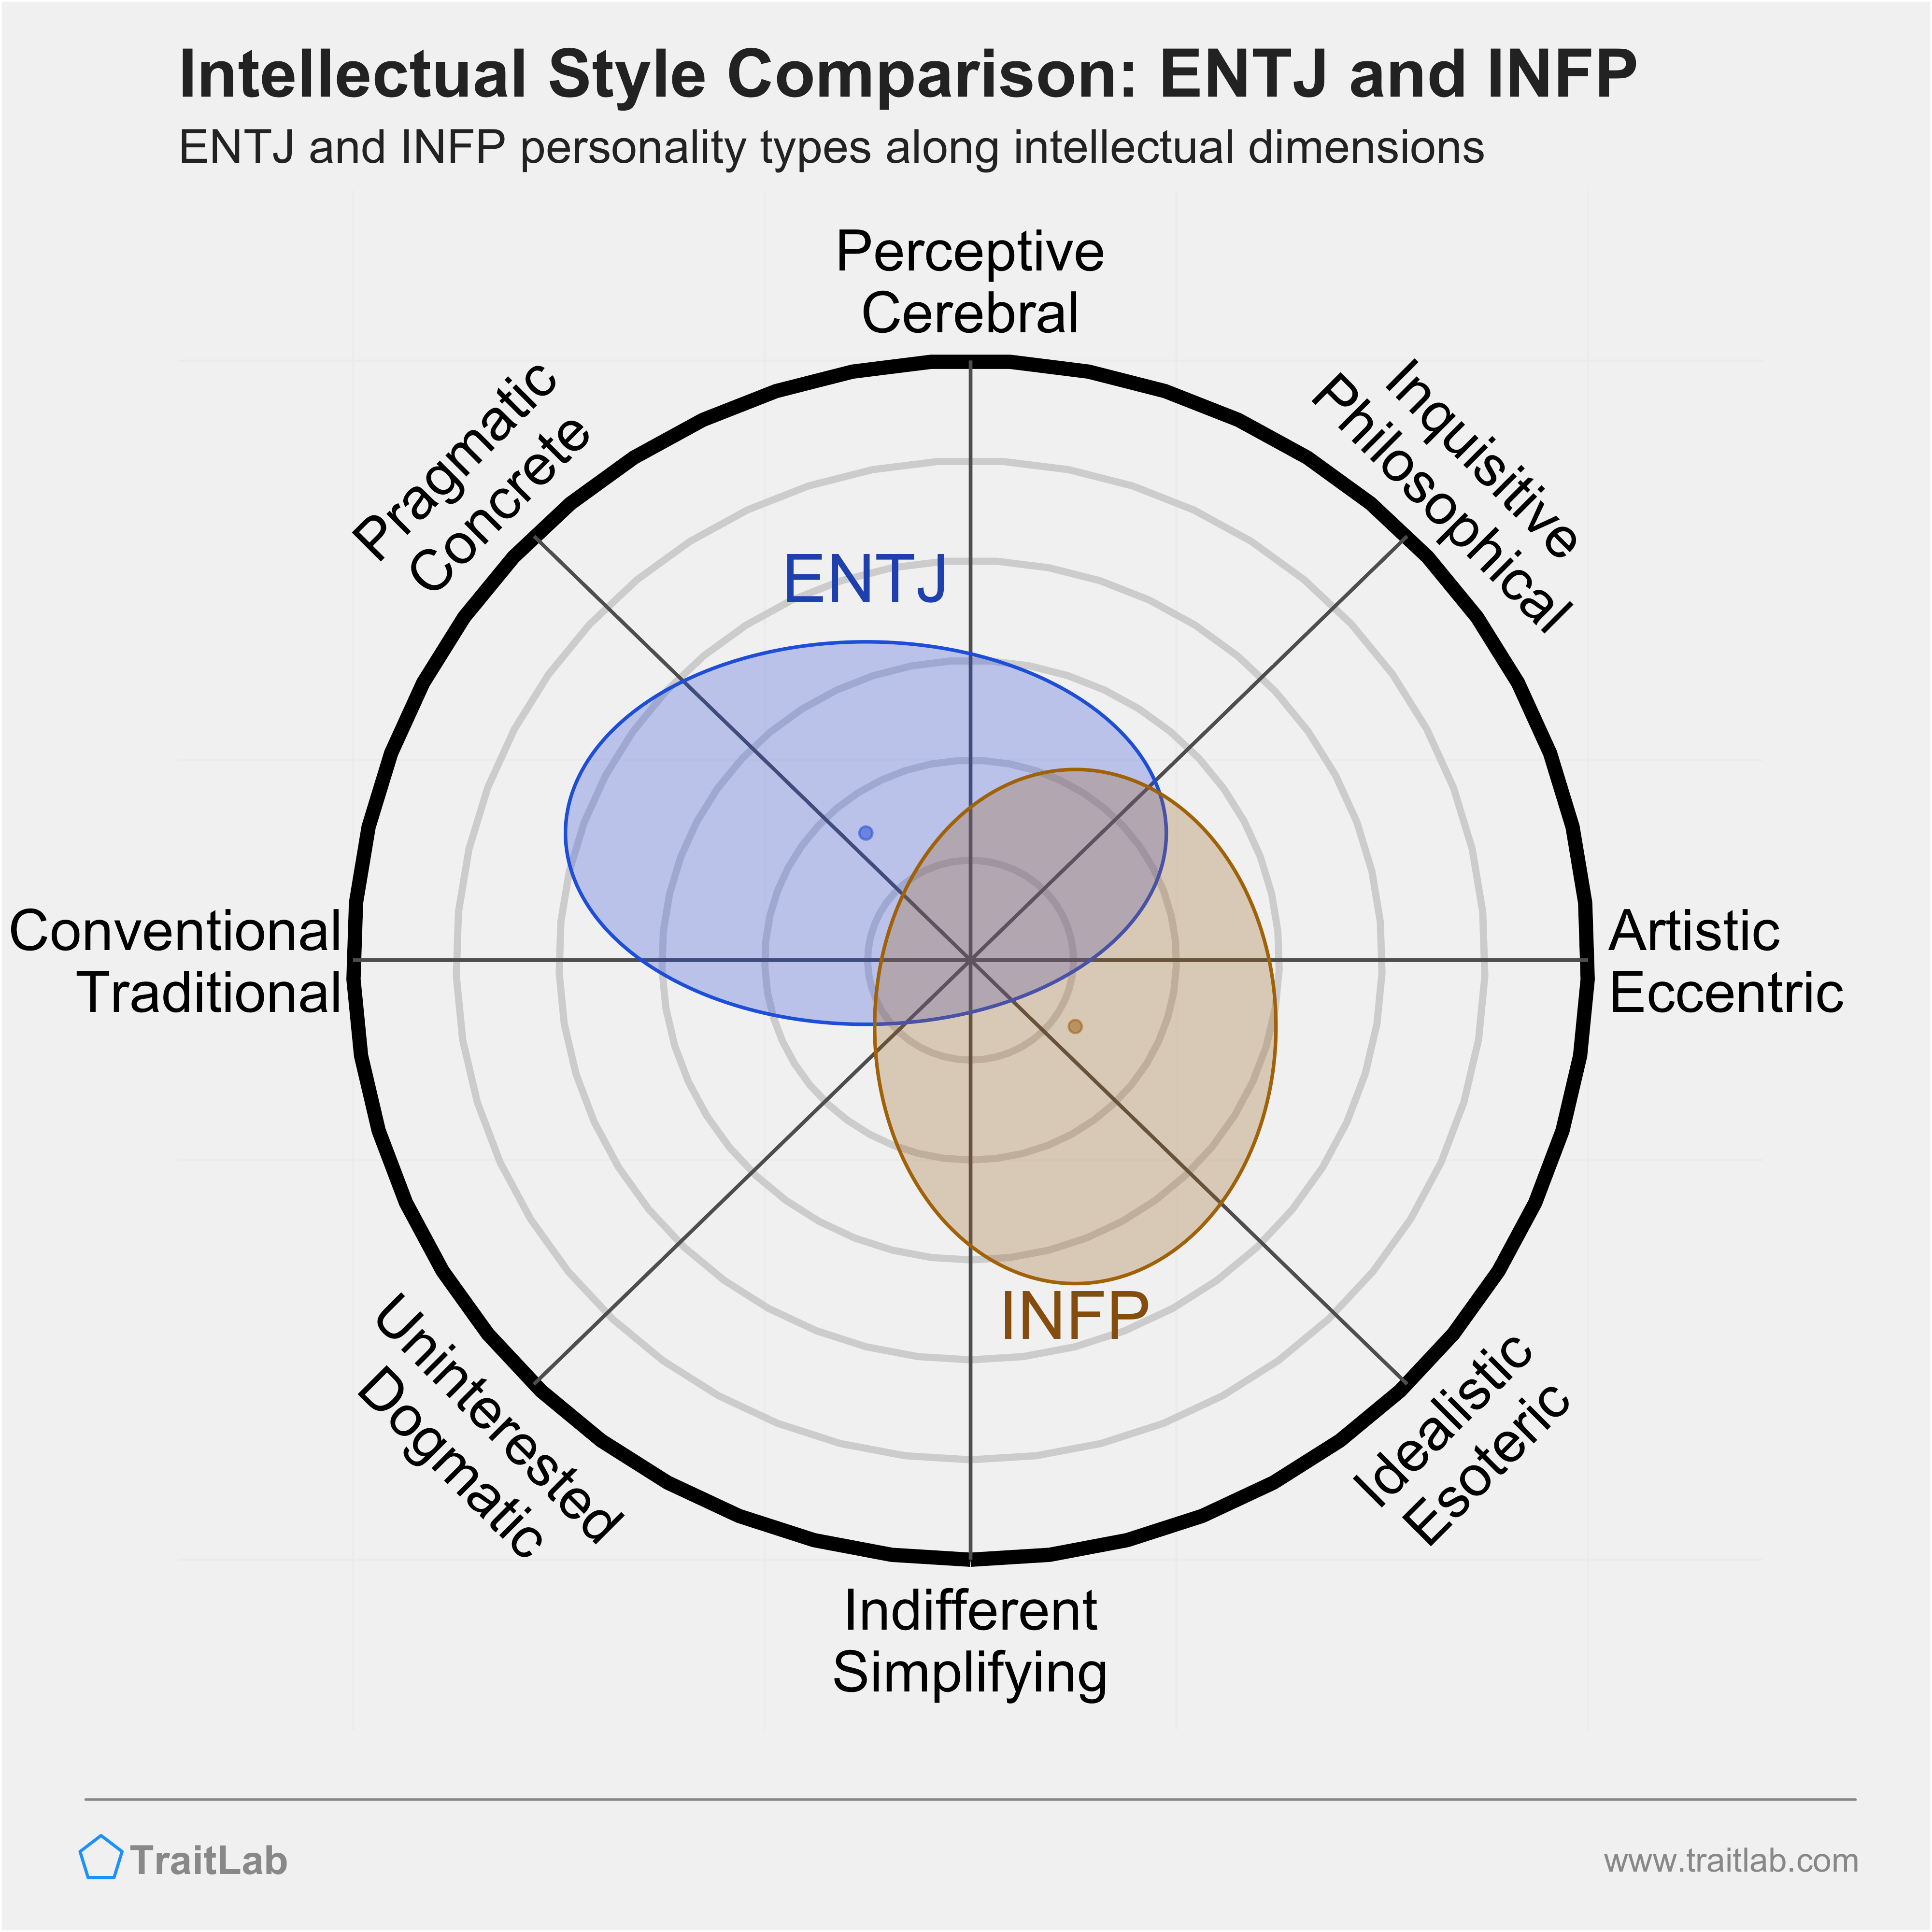 ENTJ and INFP comparison across intellectual dimensions